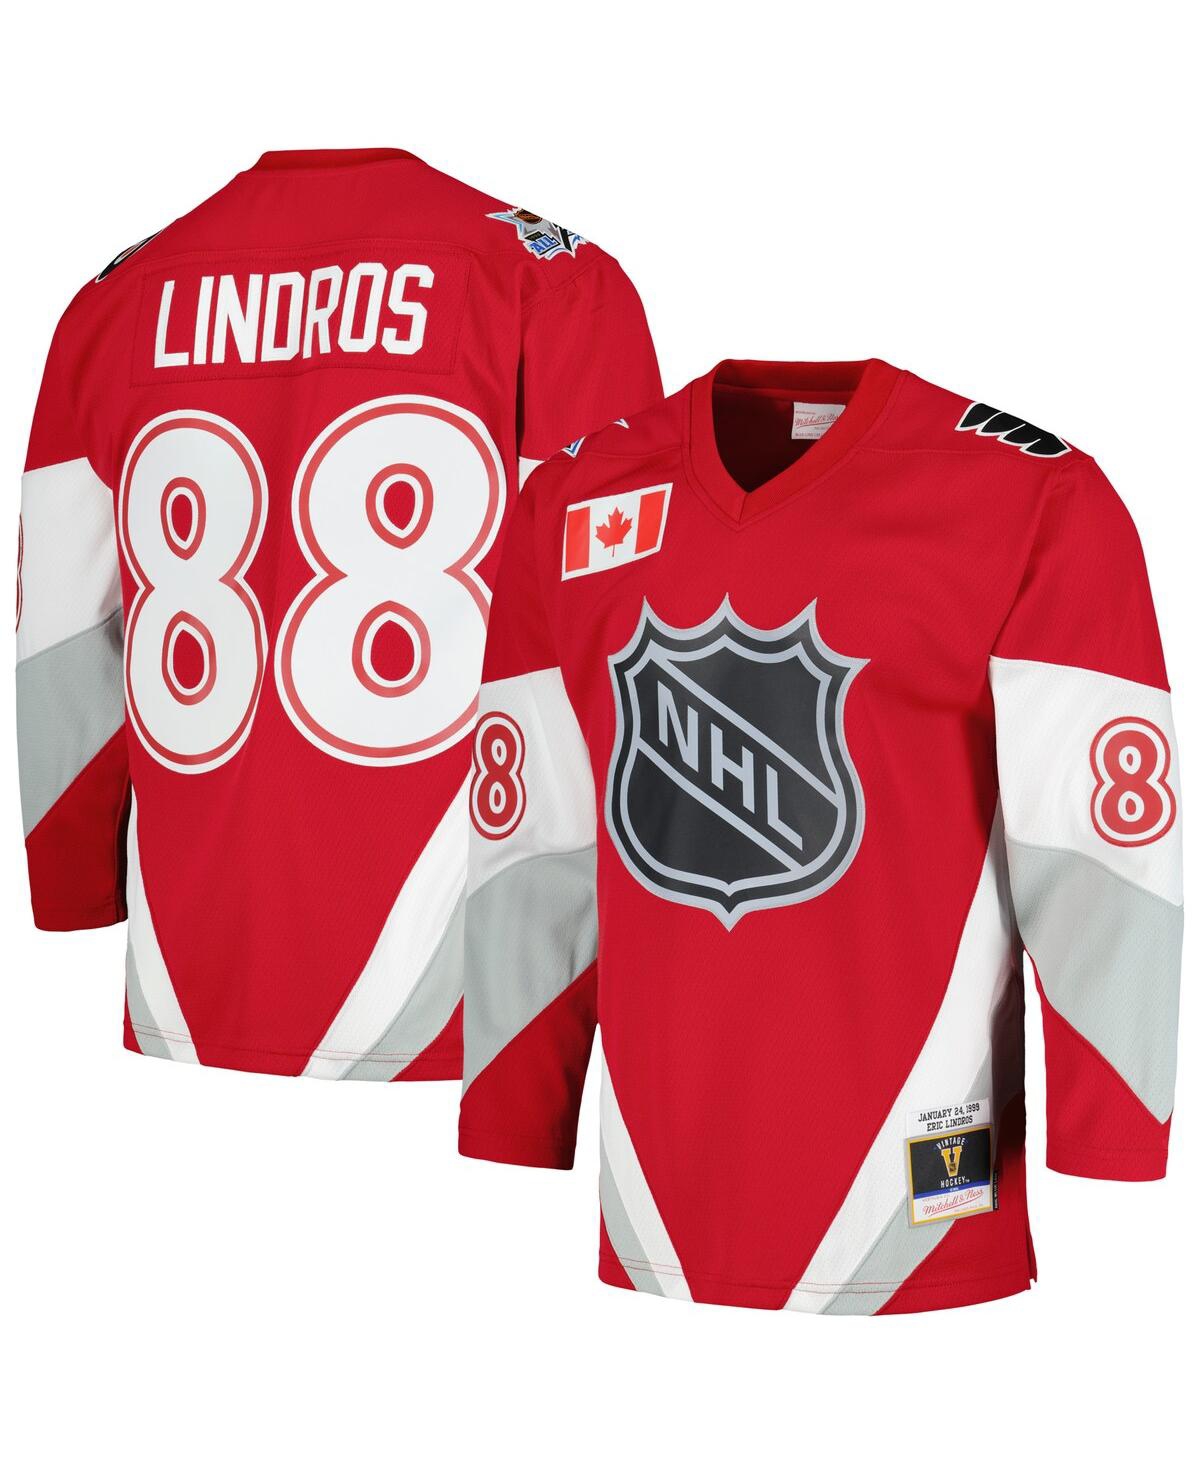 Mitchell Ness Men's Eric Lindros Scarlet 1999 Nhl All-Star Game Blue Line Player Jersey - Scarlet